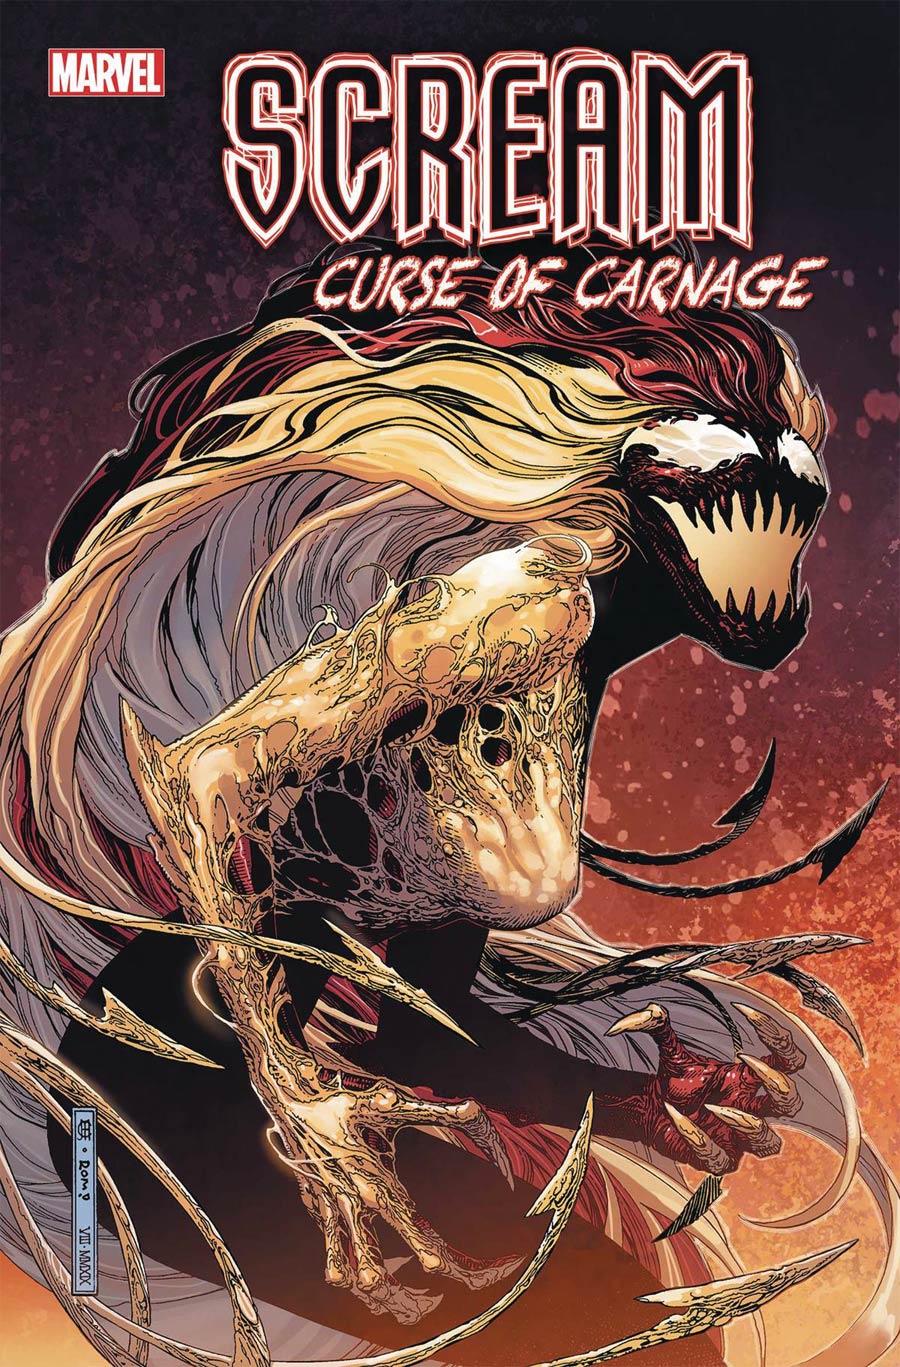 Scream Curse Of Carnage #1 By Jim Cheung Poster